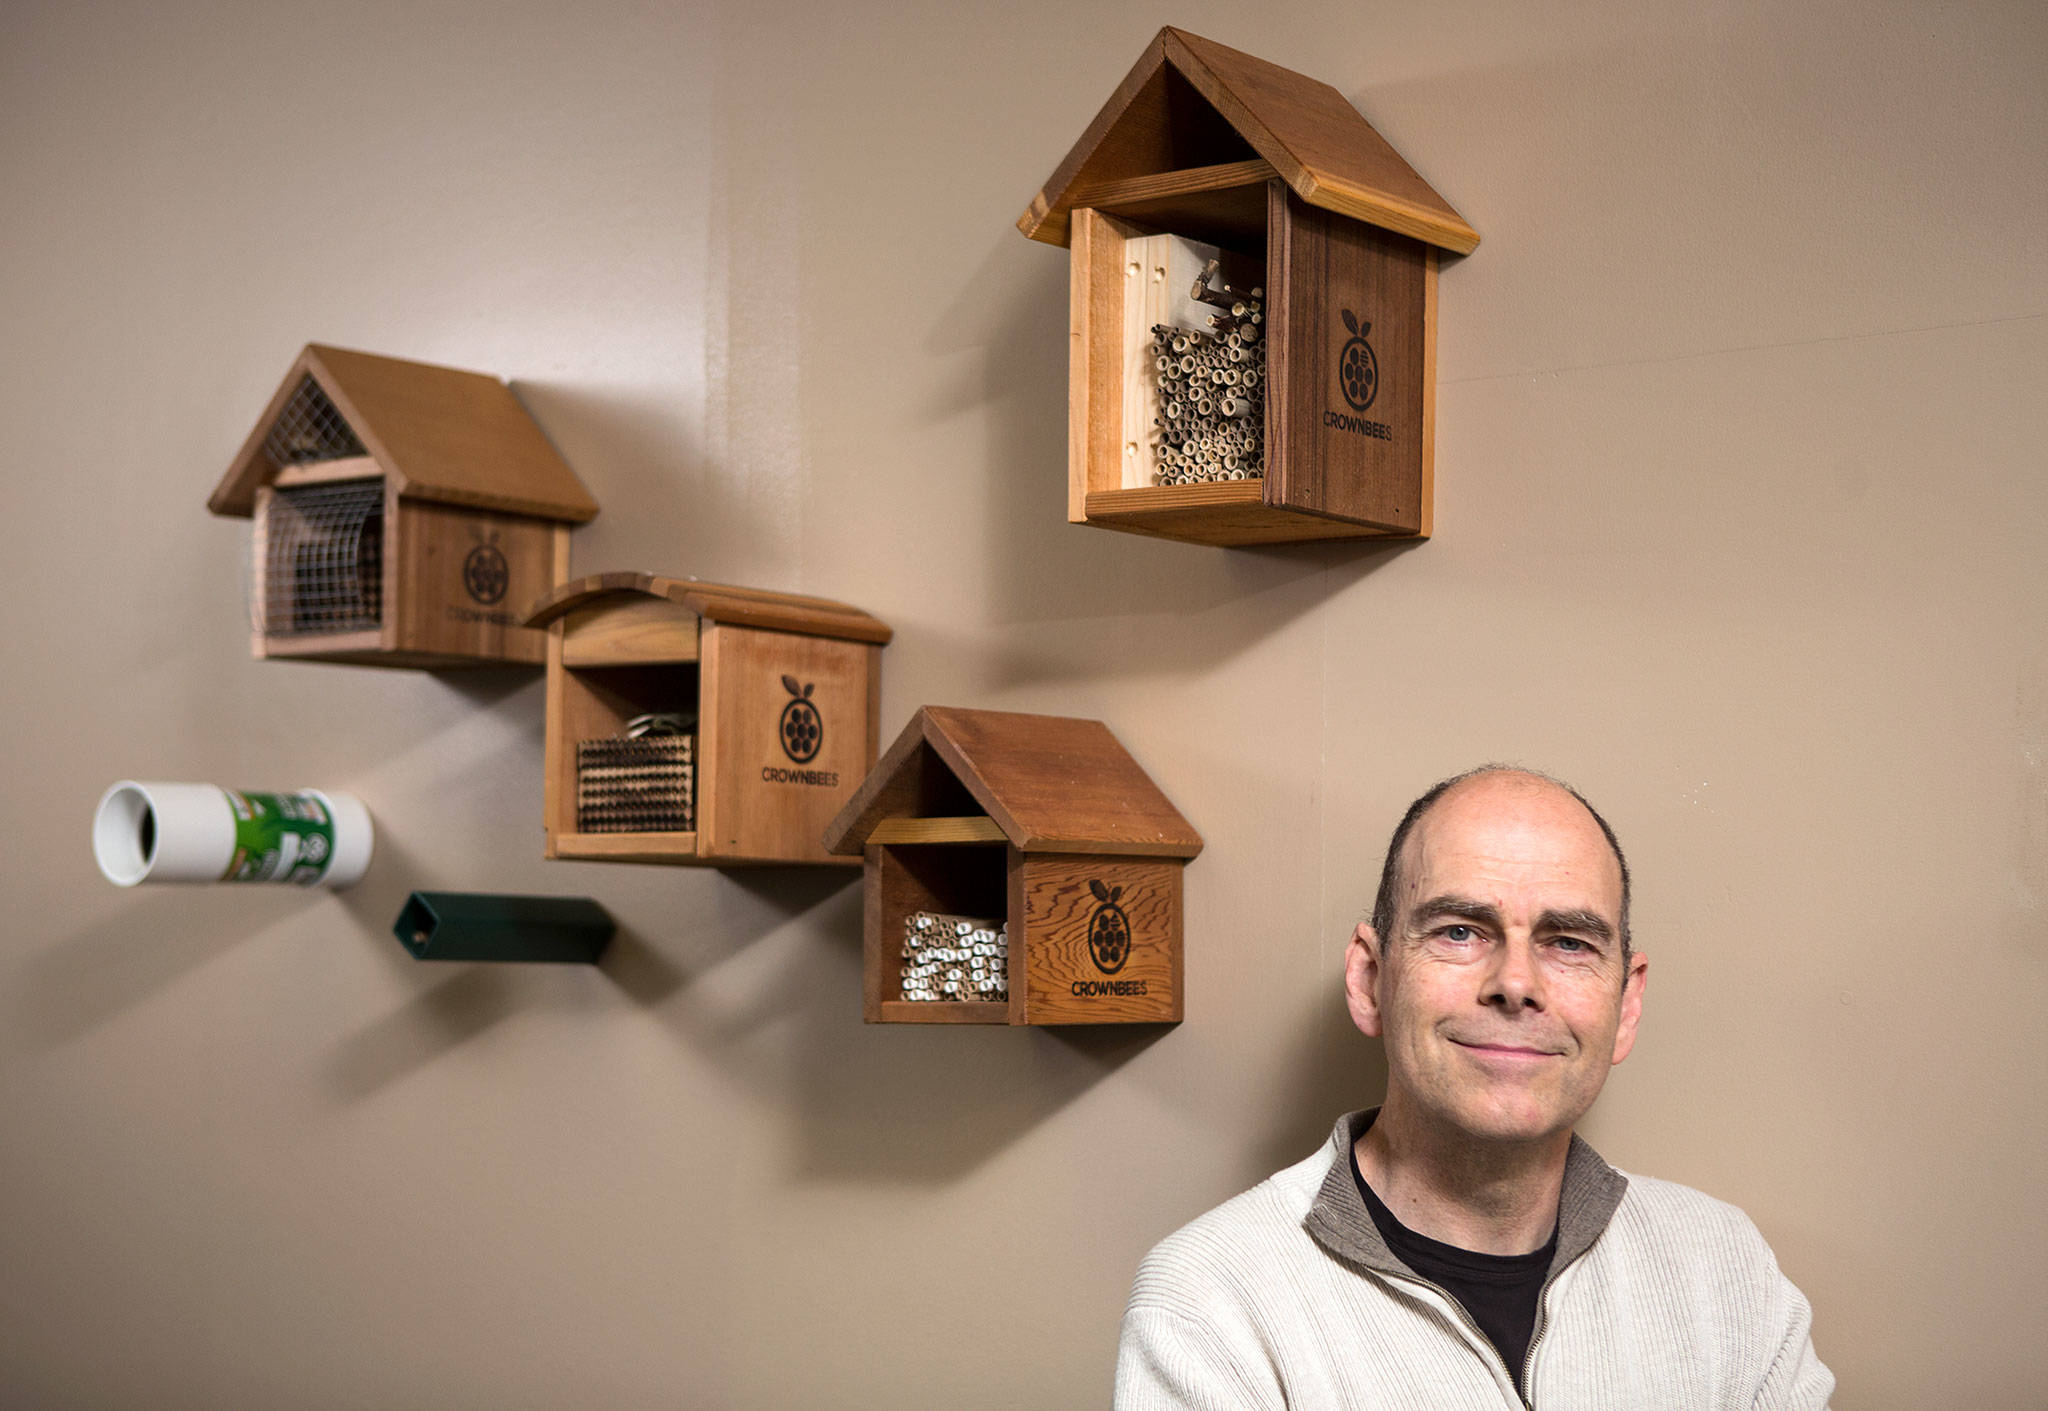 Dave Hunter, founder and owner of Crown Bees, stands by bee nesting houses on Monday, April 9, 2018 in Woodinville. Crown Bees sells mason, leafcutter and other hole-nesting bees for homes, farms and commercial interests. (Andy Bronson / The Herald)